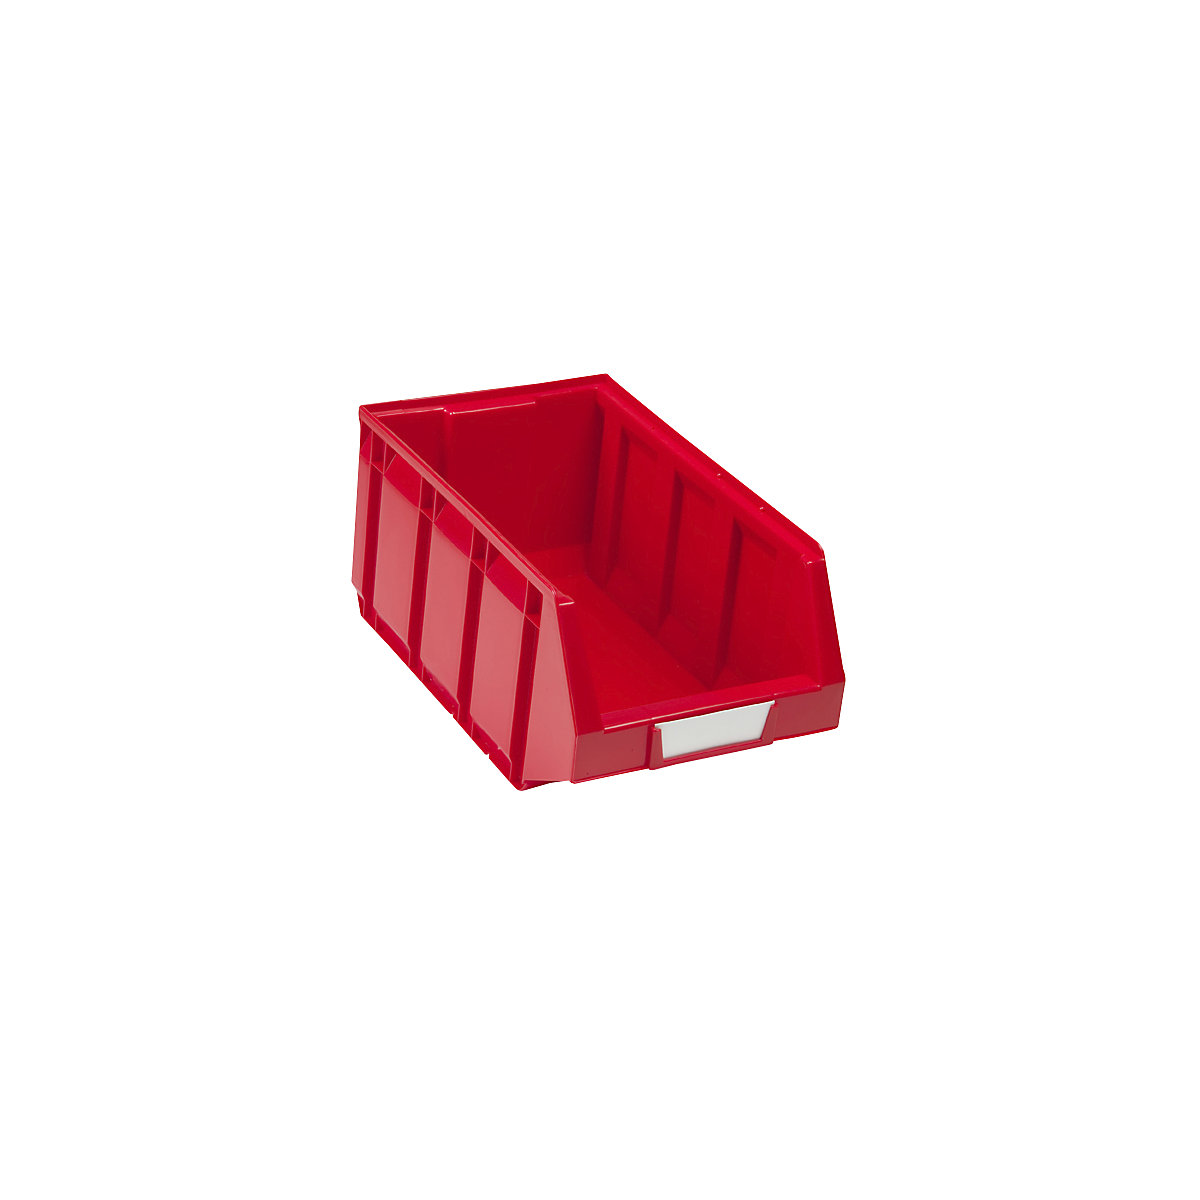 Open fronted storage bin made of polyethylene, LxWxH 345 x 205 x 164 mm, red, pack of 24-8